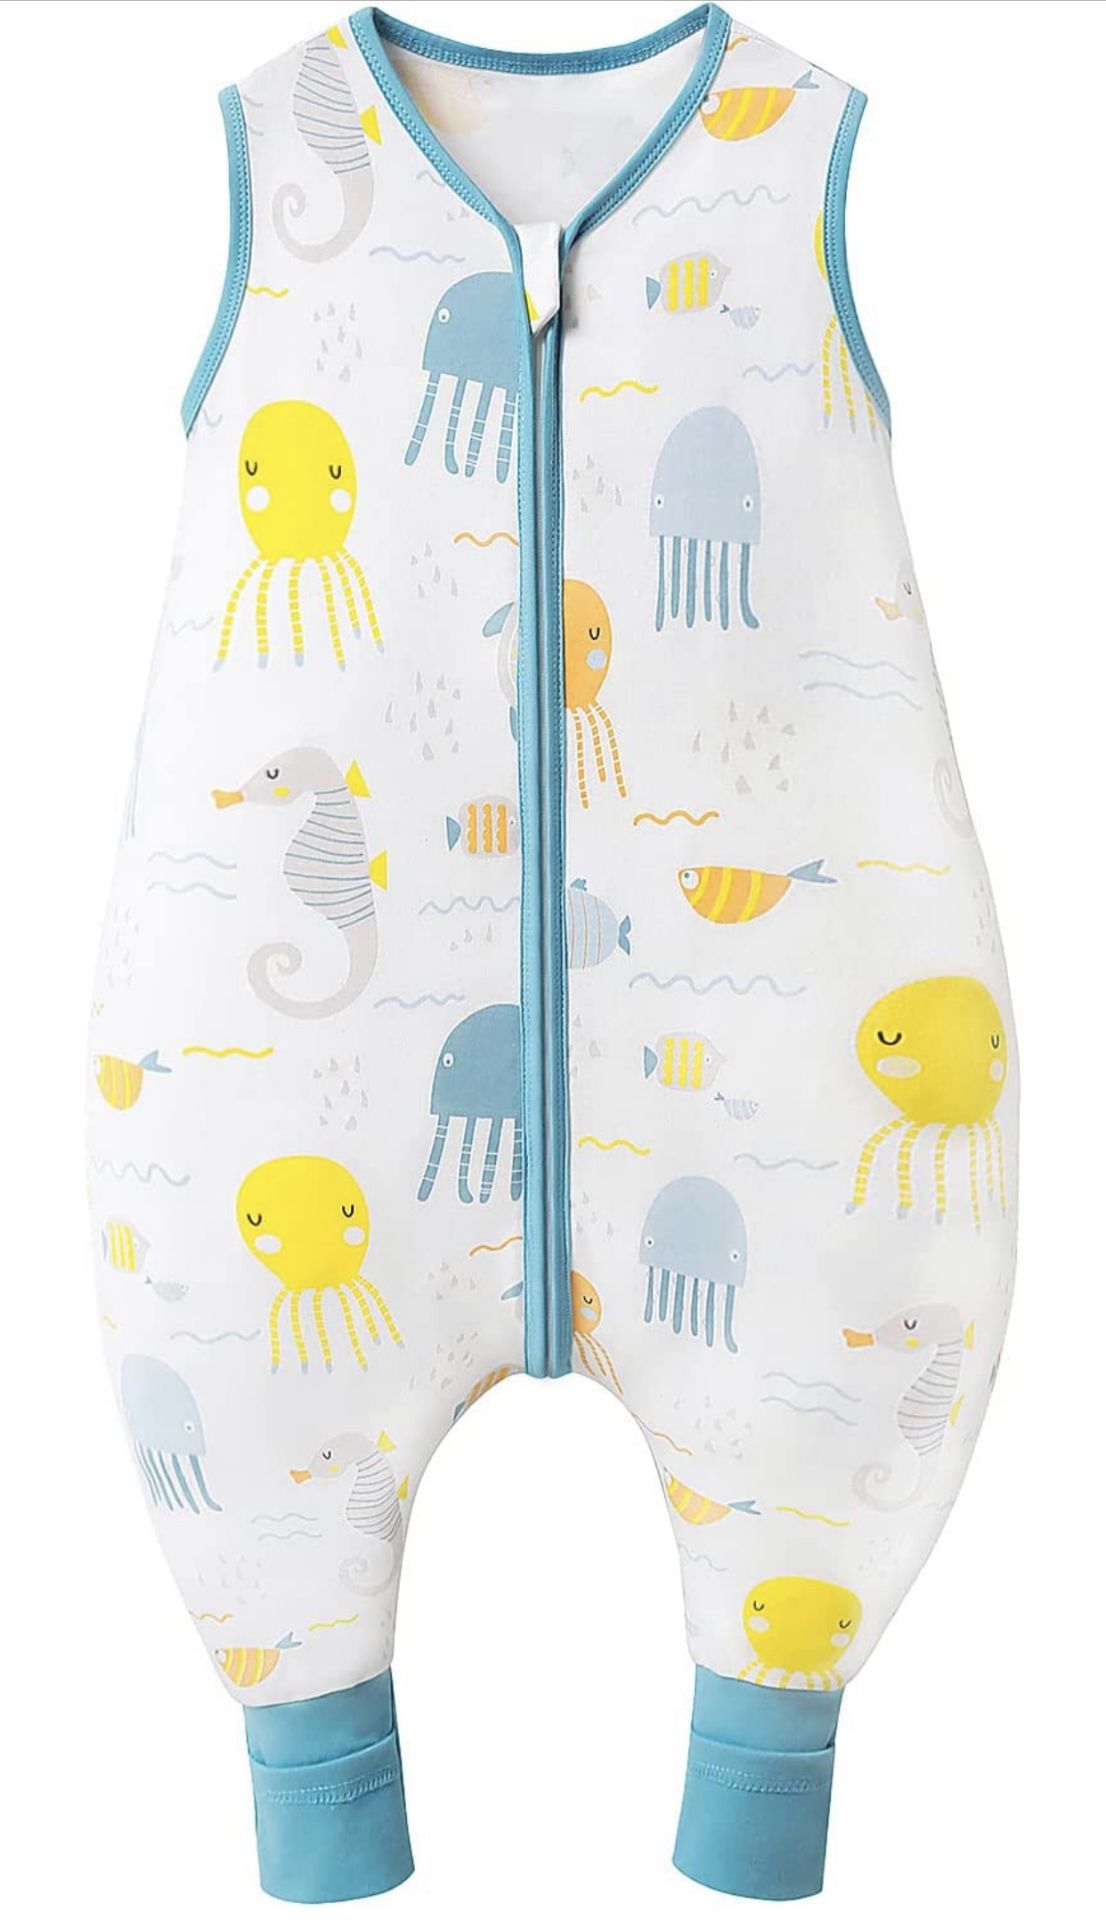 RRP £216 Collection of Mosebears Baby Sleeping Bag Baby Blankets, 12 Pieces - Image 2 of 3